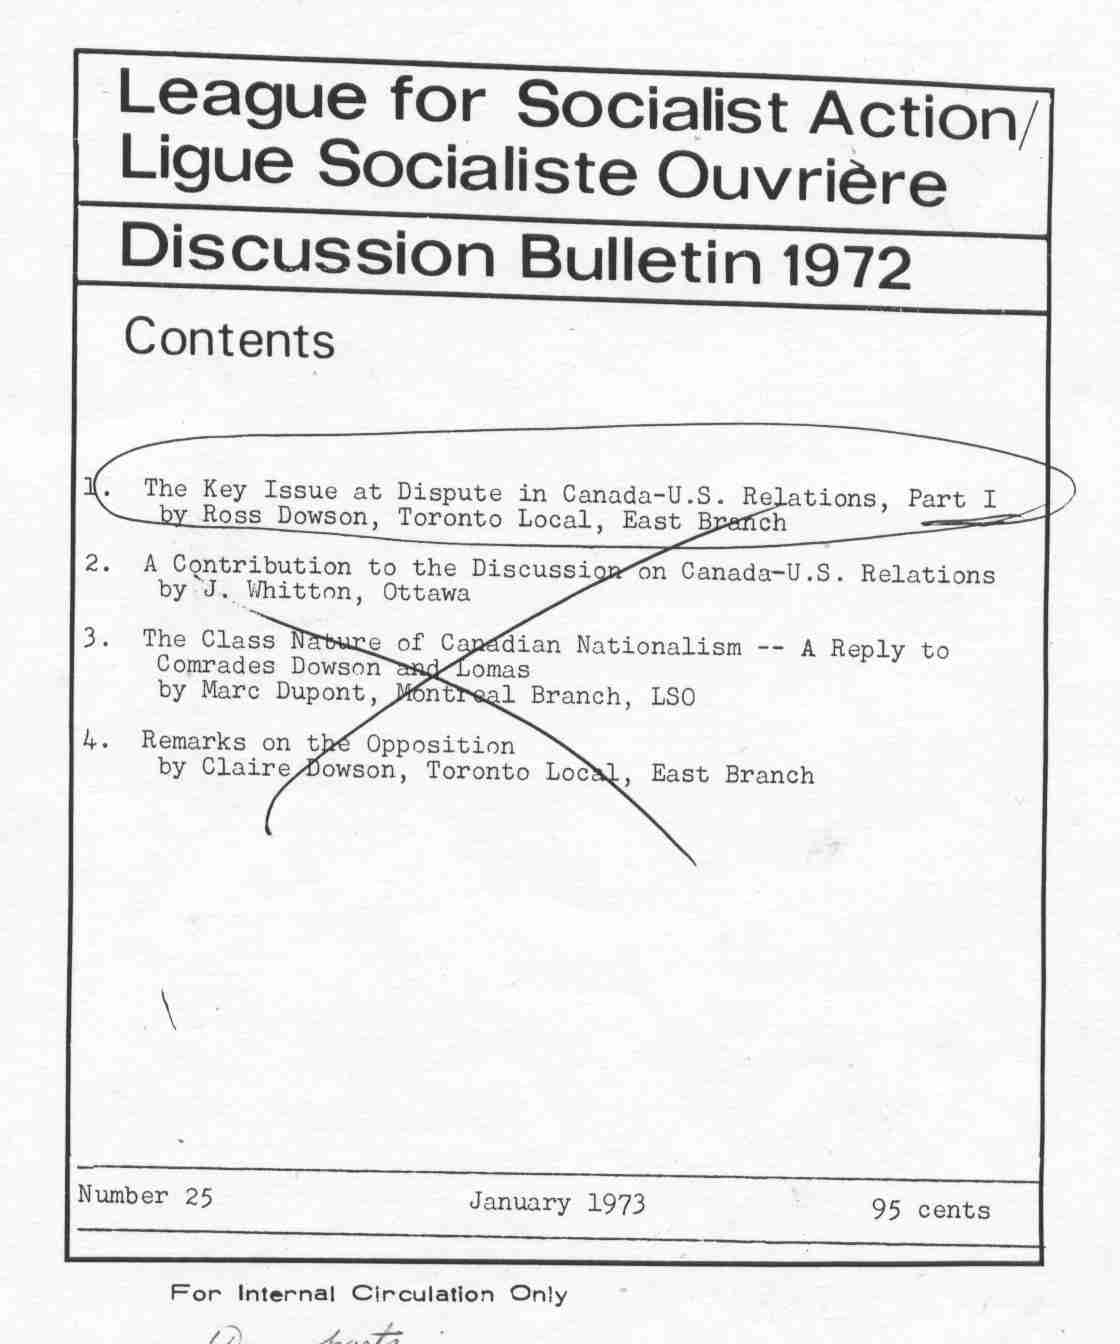 Cover page of original document